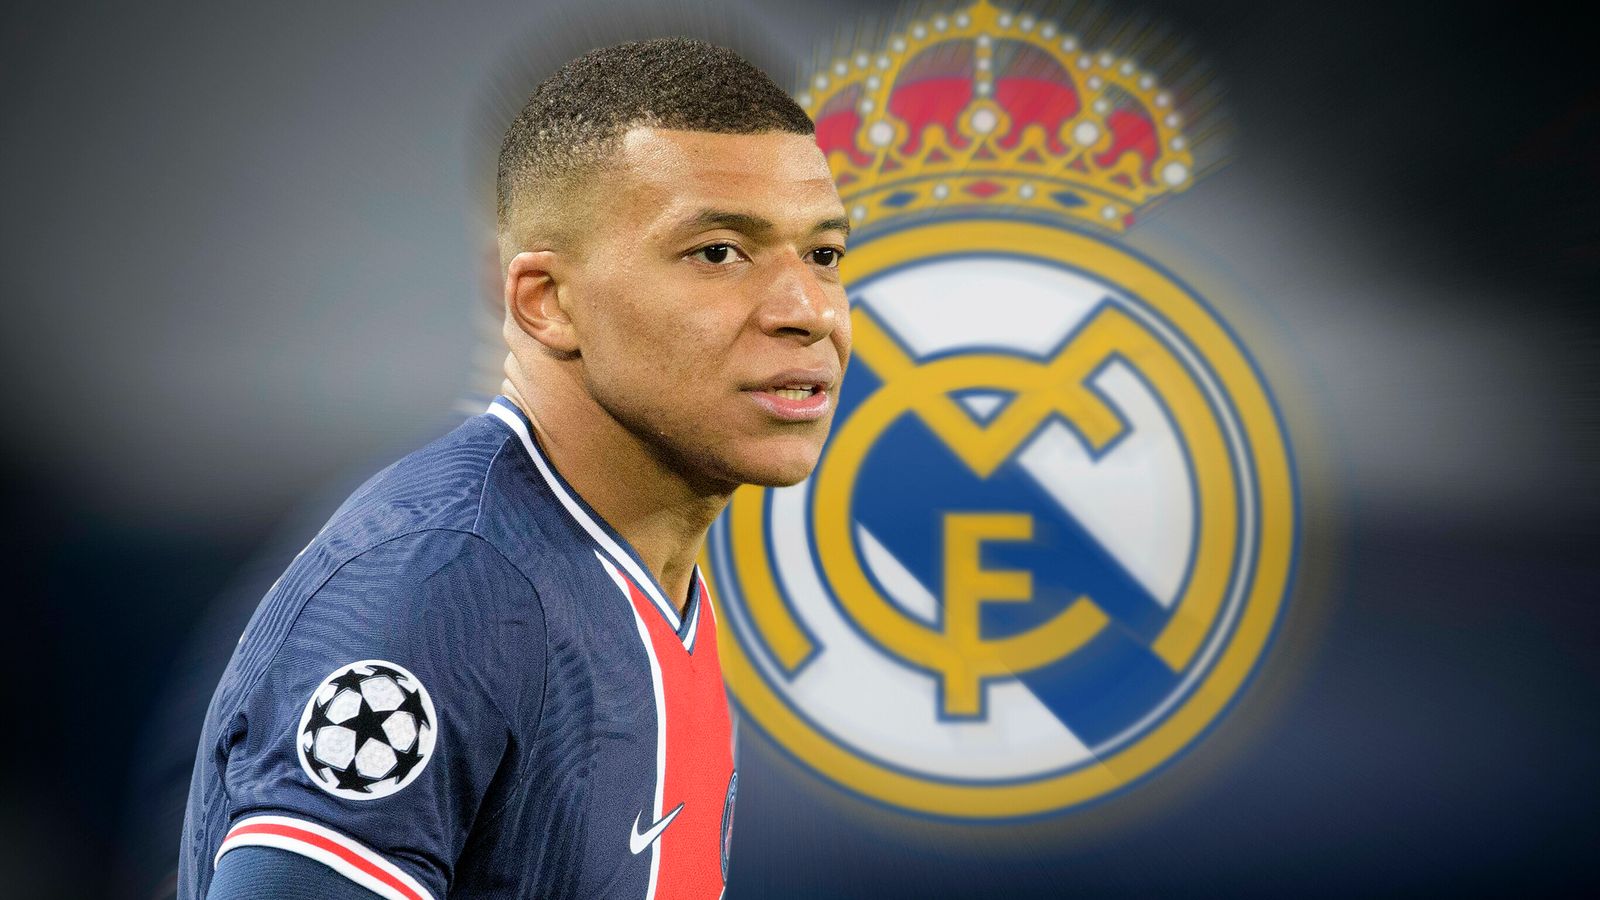 Champions League: Paris Saint-Germain face Real Madrid in last 16 with all eyes on Kylian Mbappe | Football News